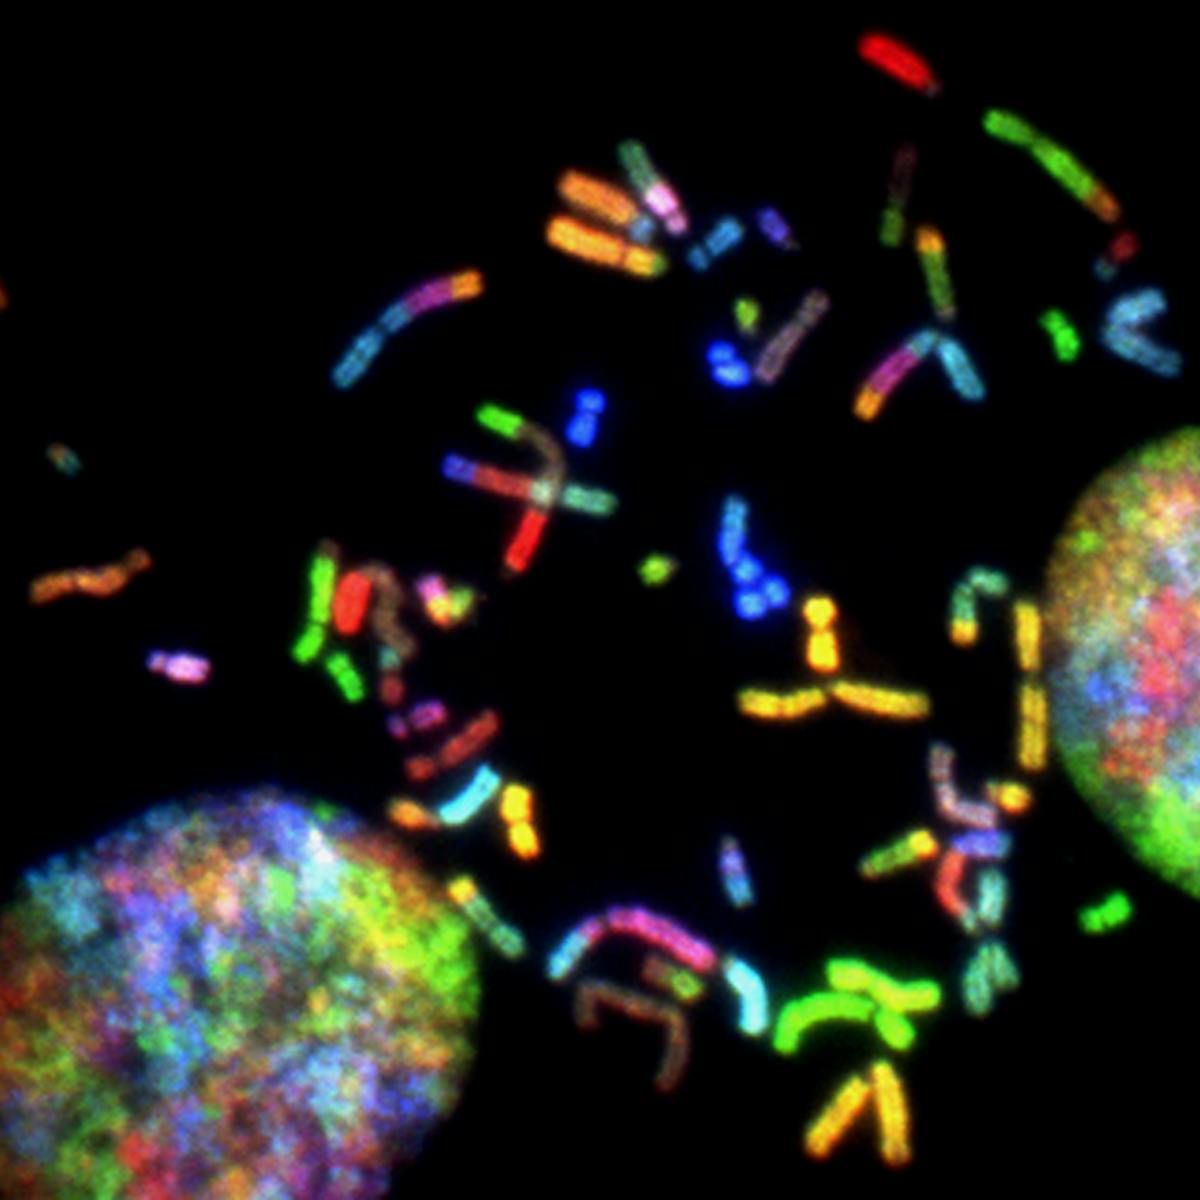 Cancer Chromosomes Brain Photo By National Cancer Institute On Unspla